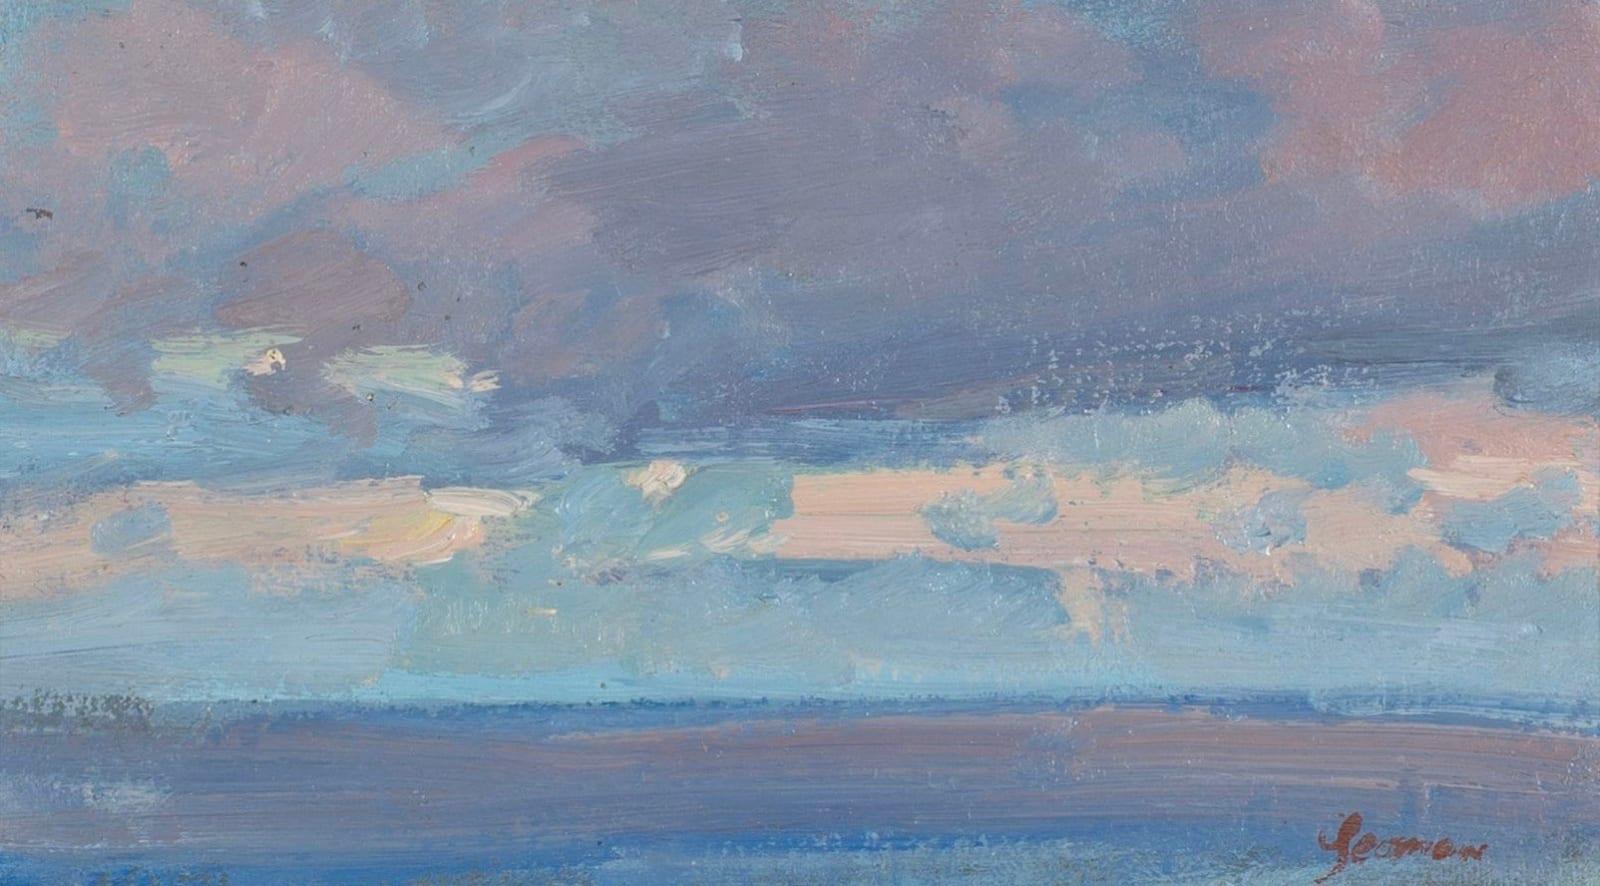 Looking North from Eday, Orkney Painting by Martin Yeoman B. 1953

Additional information:
Medium: Oil on canvas-board
Dimensions: 20.3 x 25.4 cm
8 x 10 in
Signed

Martin Yeoman was born in 1953, and studied with Peter Greenham at the Royal Academy